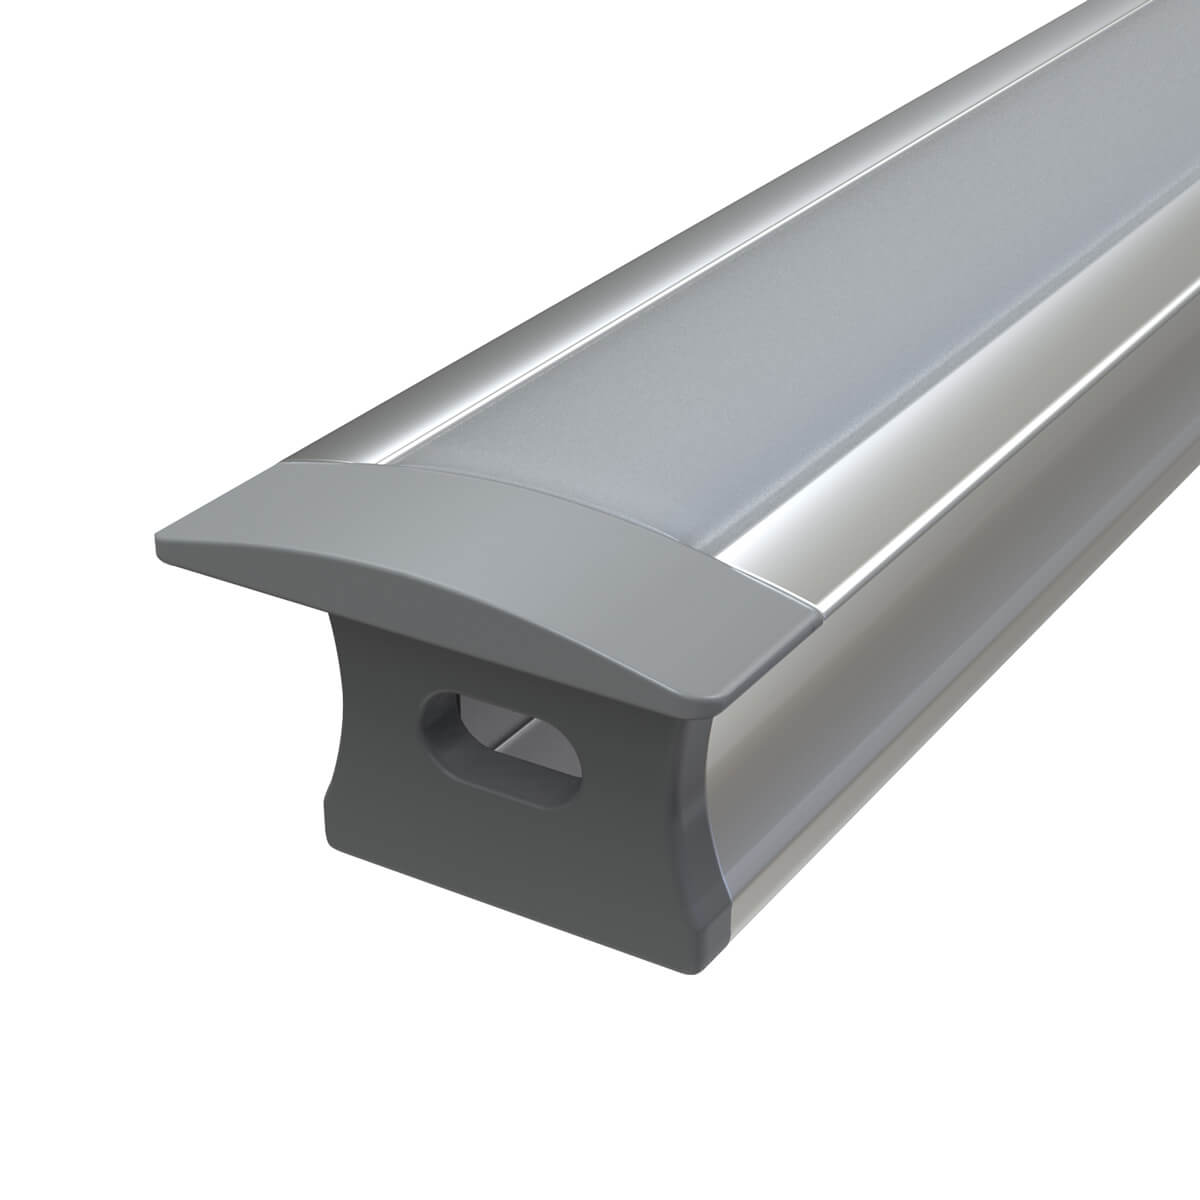 View 2m Recessed Mounted Aluminium LED Profile Extrusion information